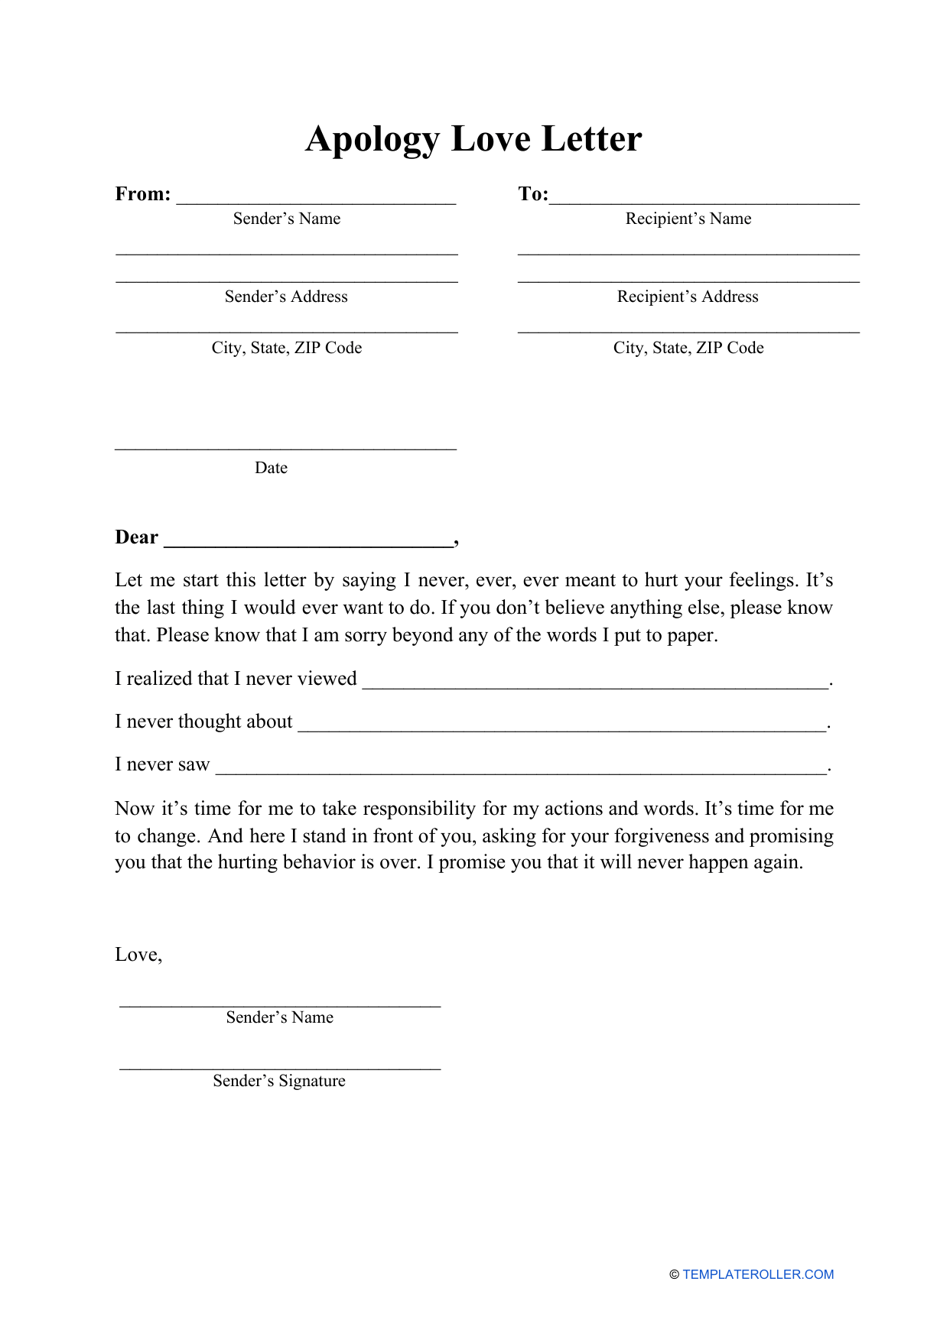 Apology Love Letter Template Download Printable Pdf Templateroller 1808